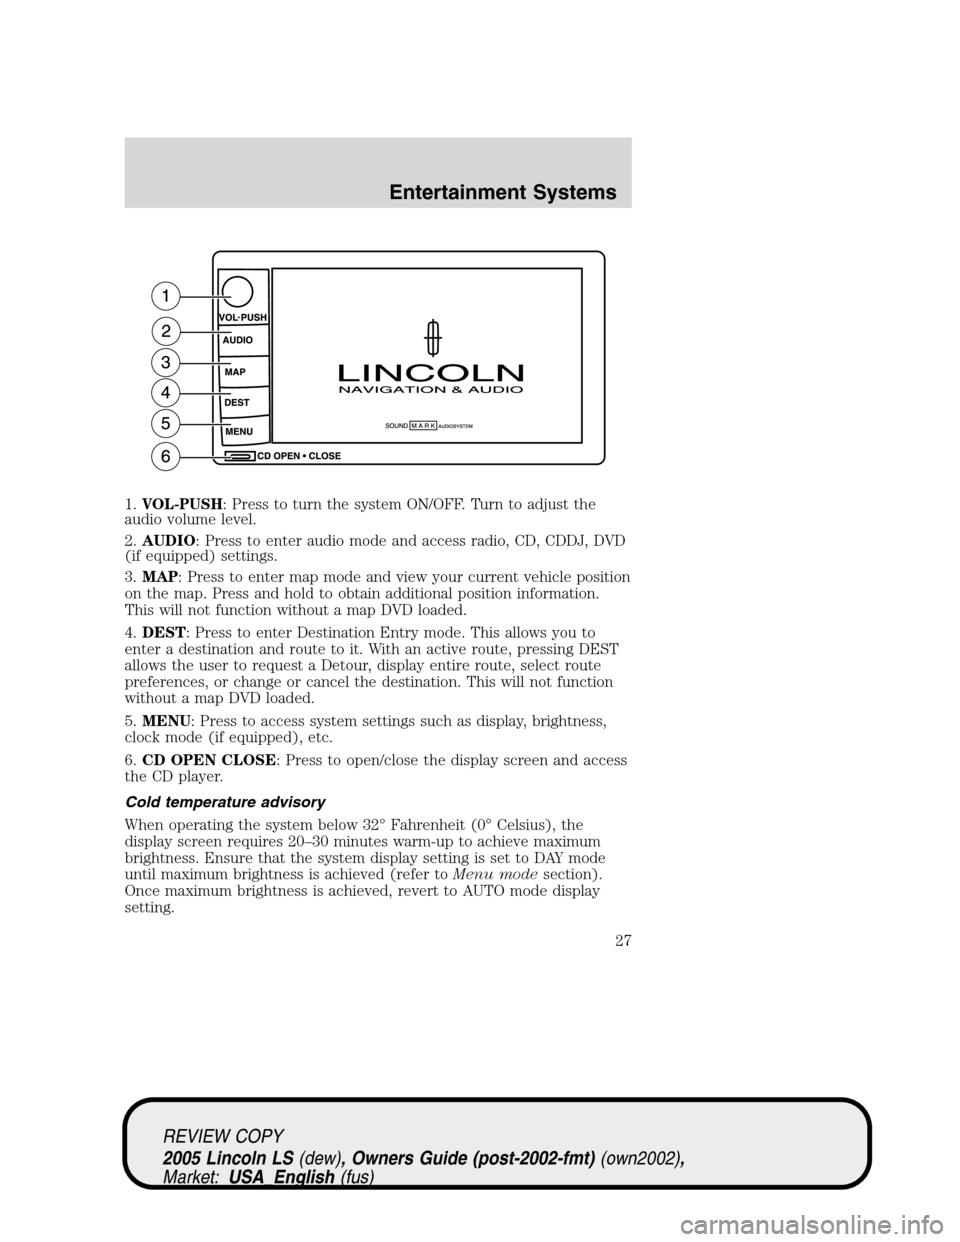 LINCOLN LS 2005 User Guide 1.VOL-PUSH: Press to turn the system ON/OFF. Turn to adjust the
audio volume level.
2.AUDIO: Press to enter audio mode and access radio, CD, CDDJ, DVD
(if equipped) settings.
3.MAP: Press to enter map